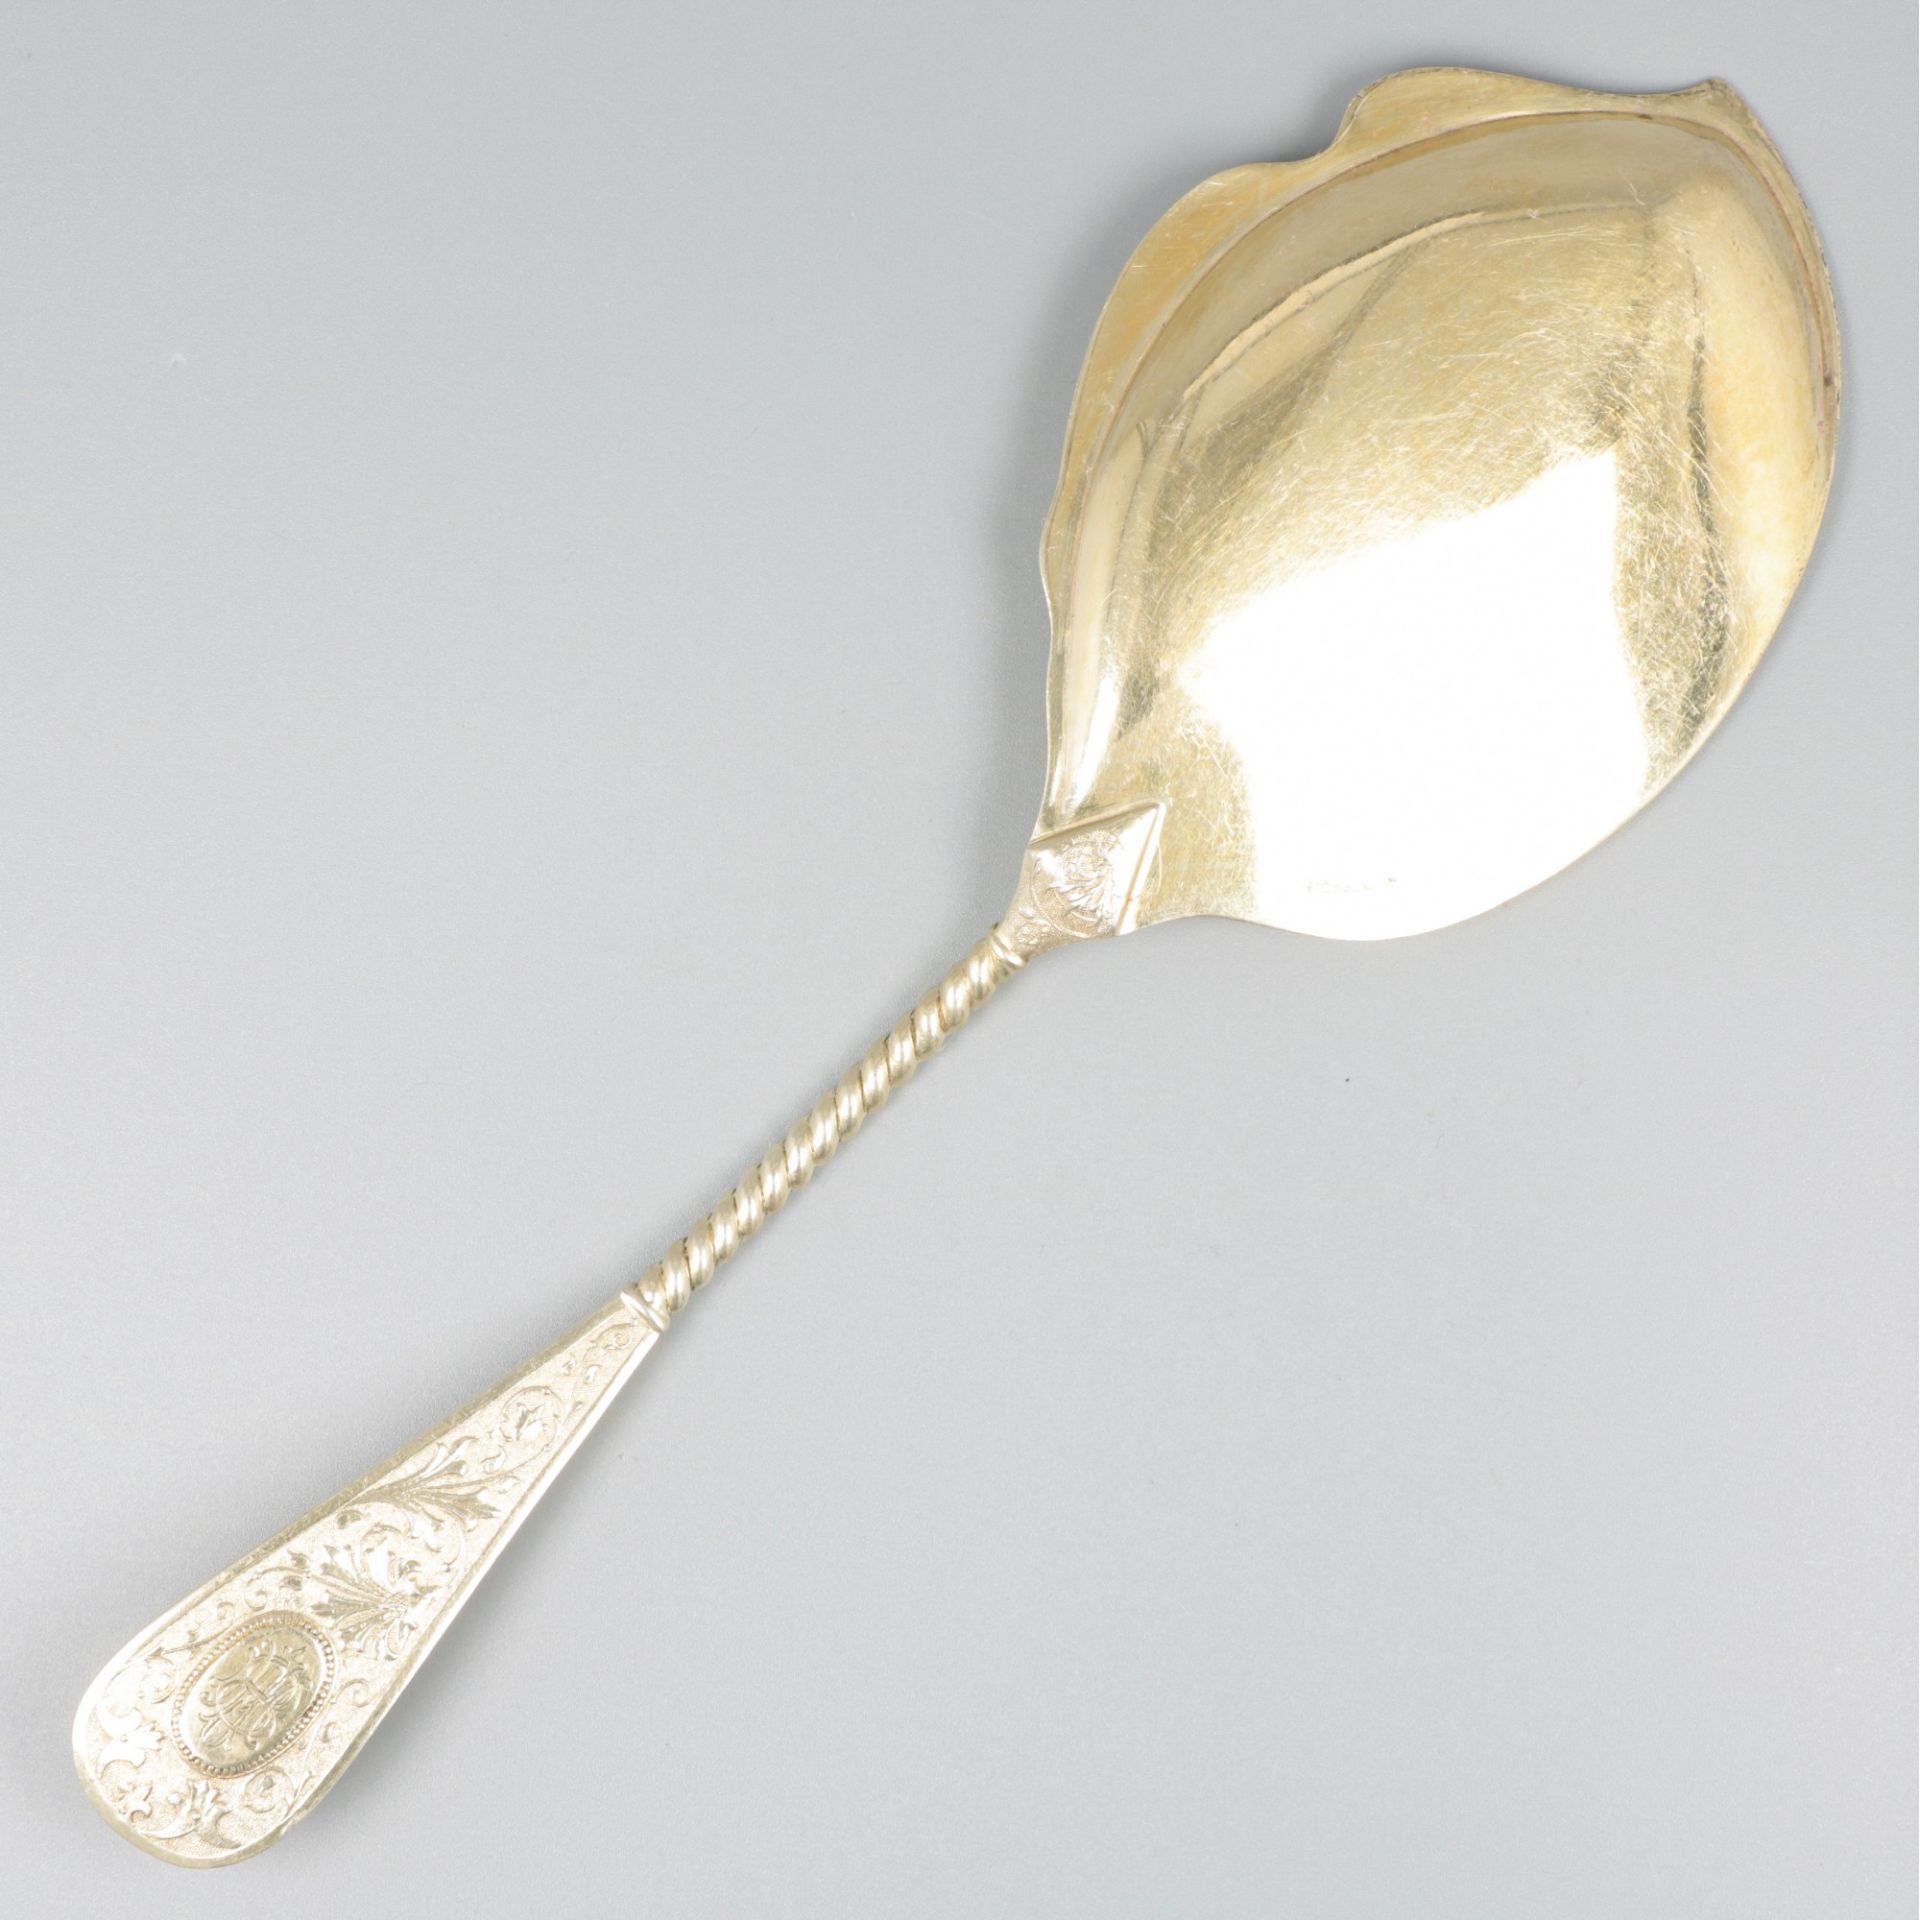 Pastry scoop / server silver. - Image 2 of 6